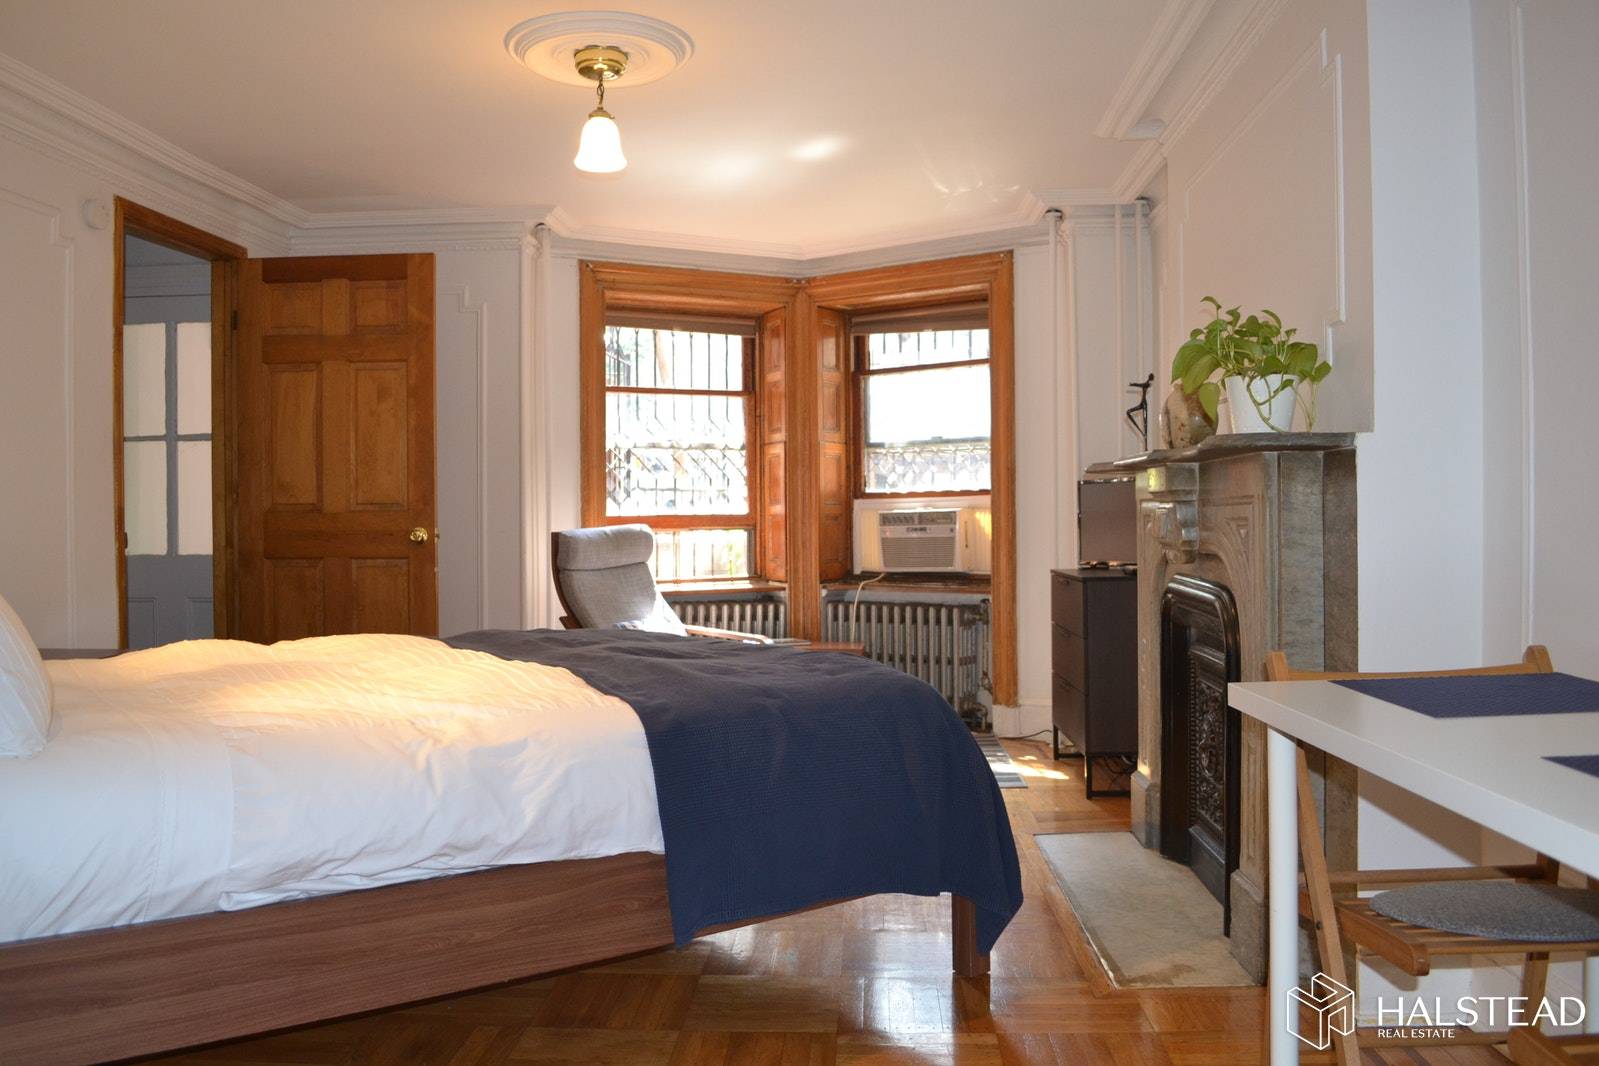 The studio is located on the garden level of our brownstone in historic Park Slope.